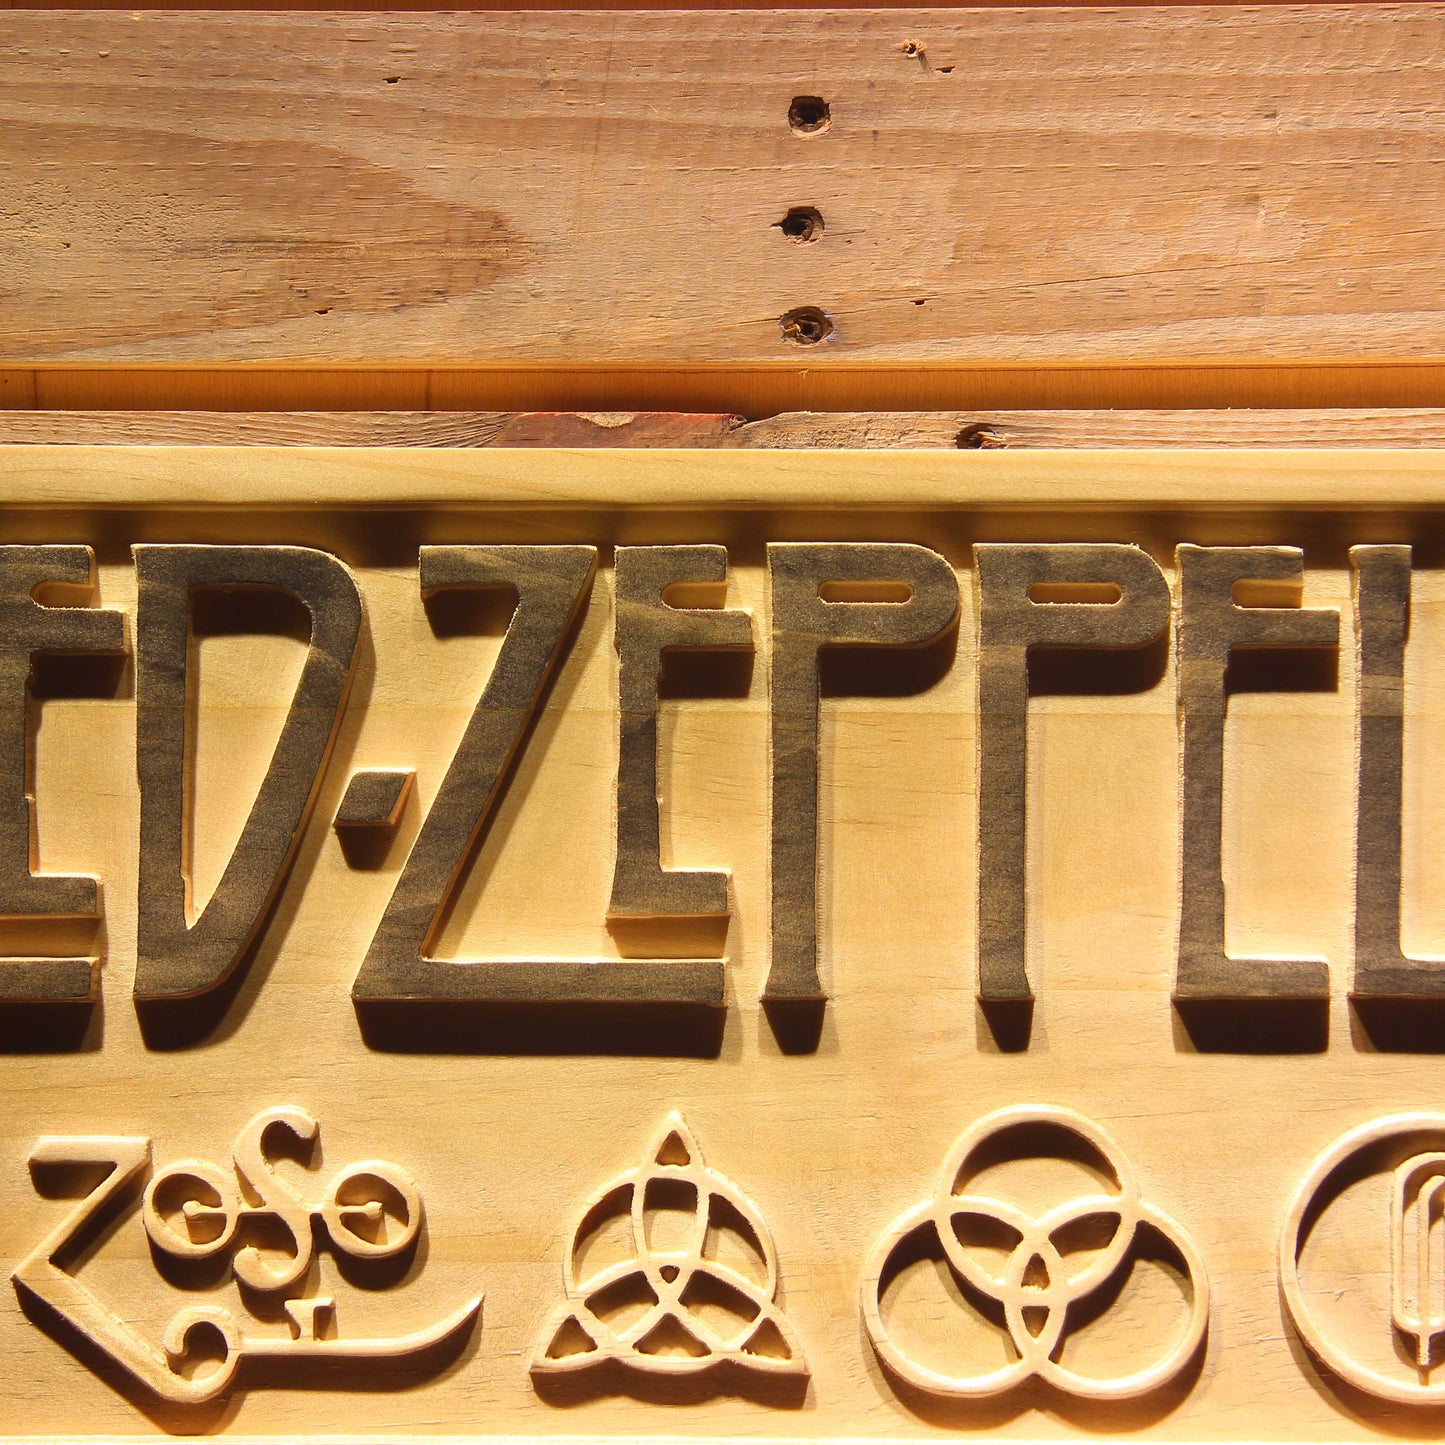 LED Zeppelin  3D Wooden Bar Signs by Woody Signs Co. - Handmade Crafted Unique Wooden Creative